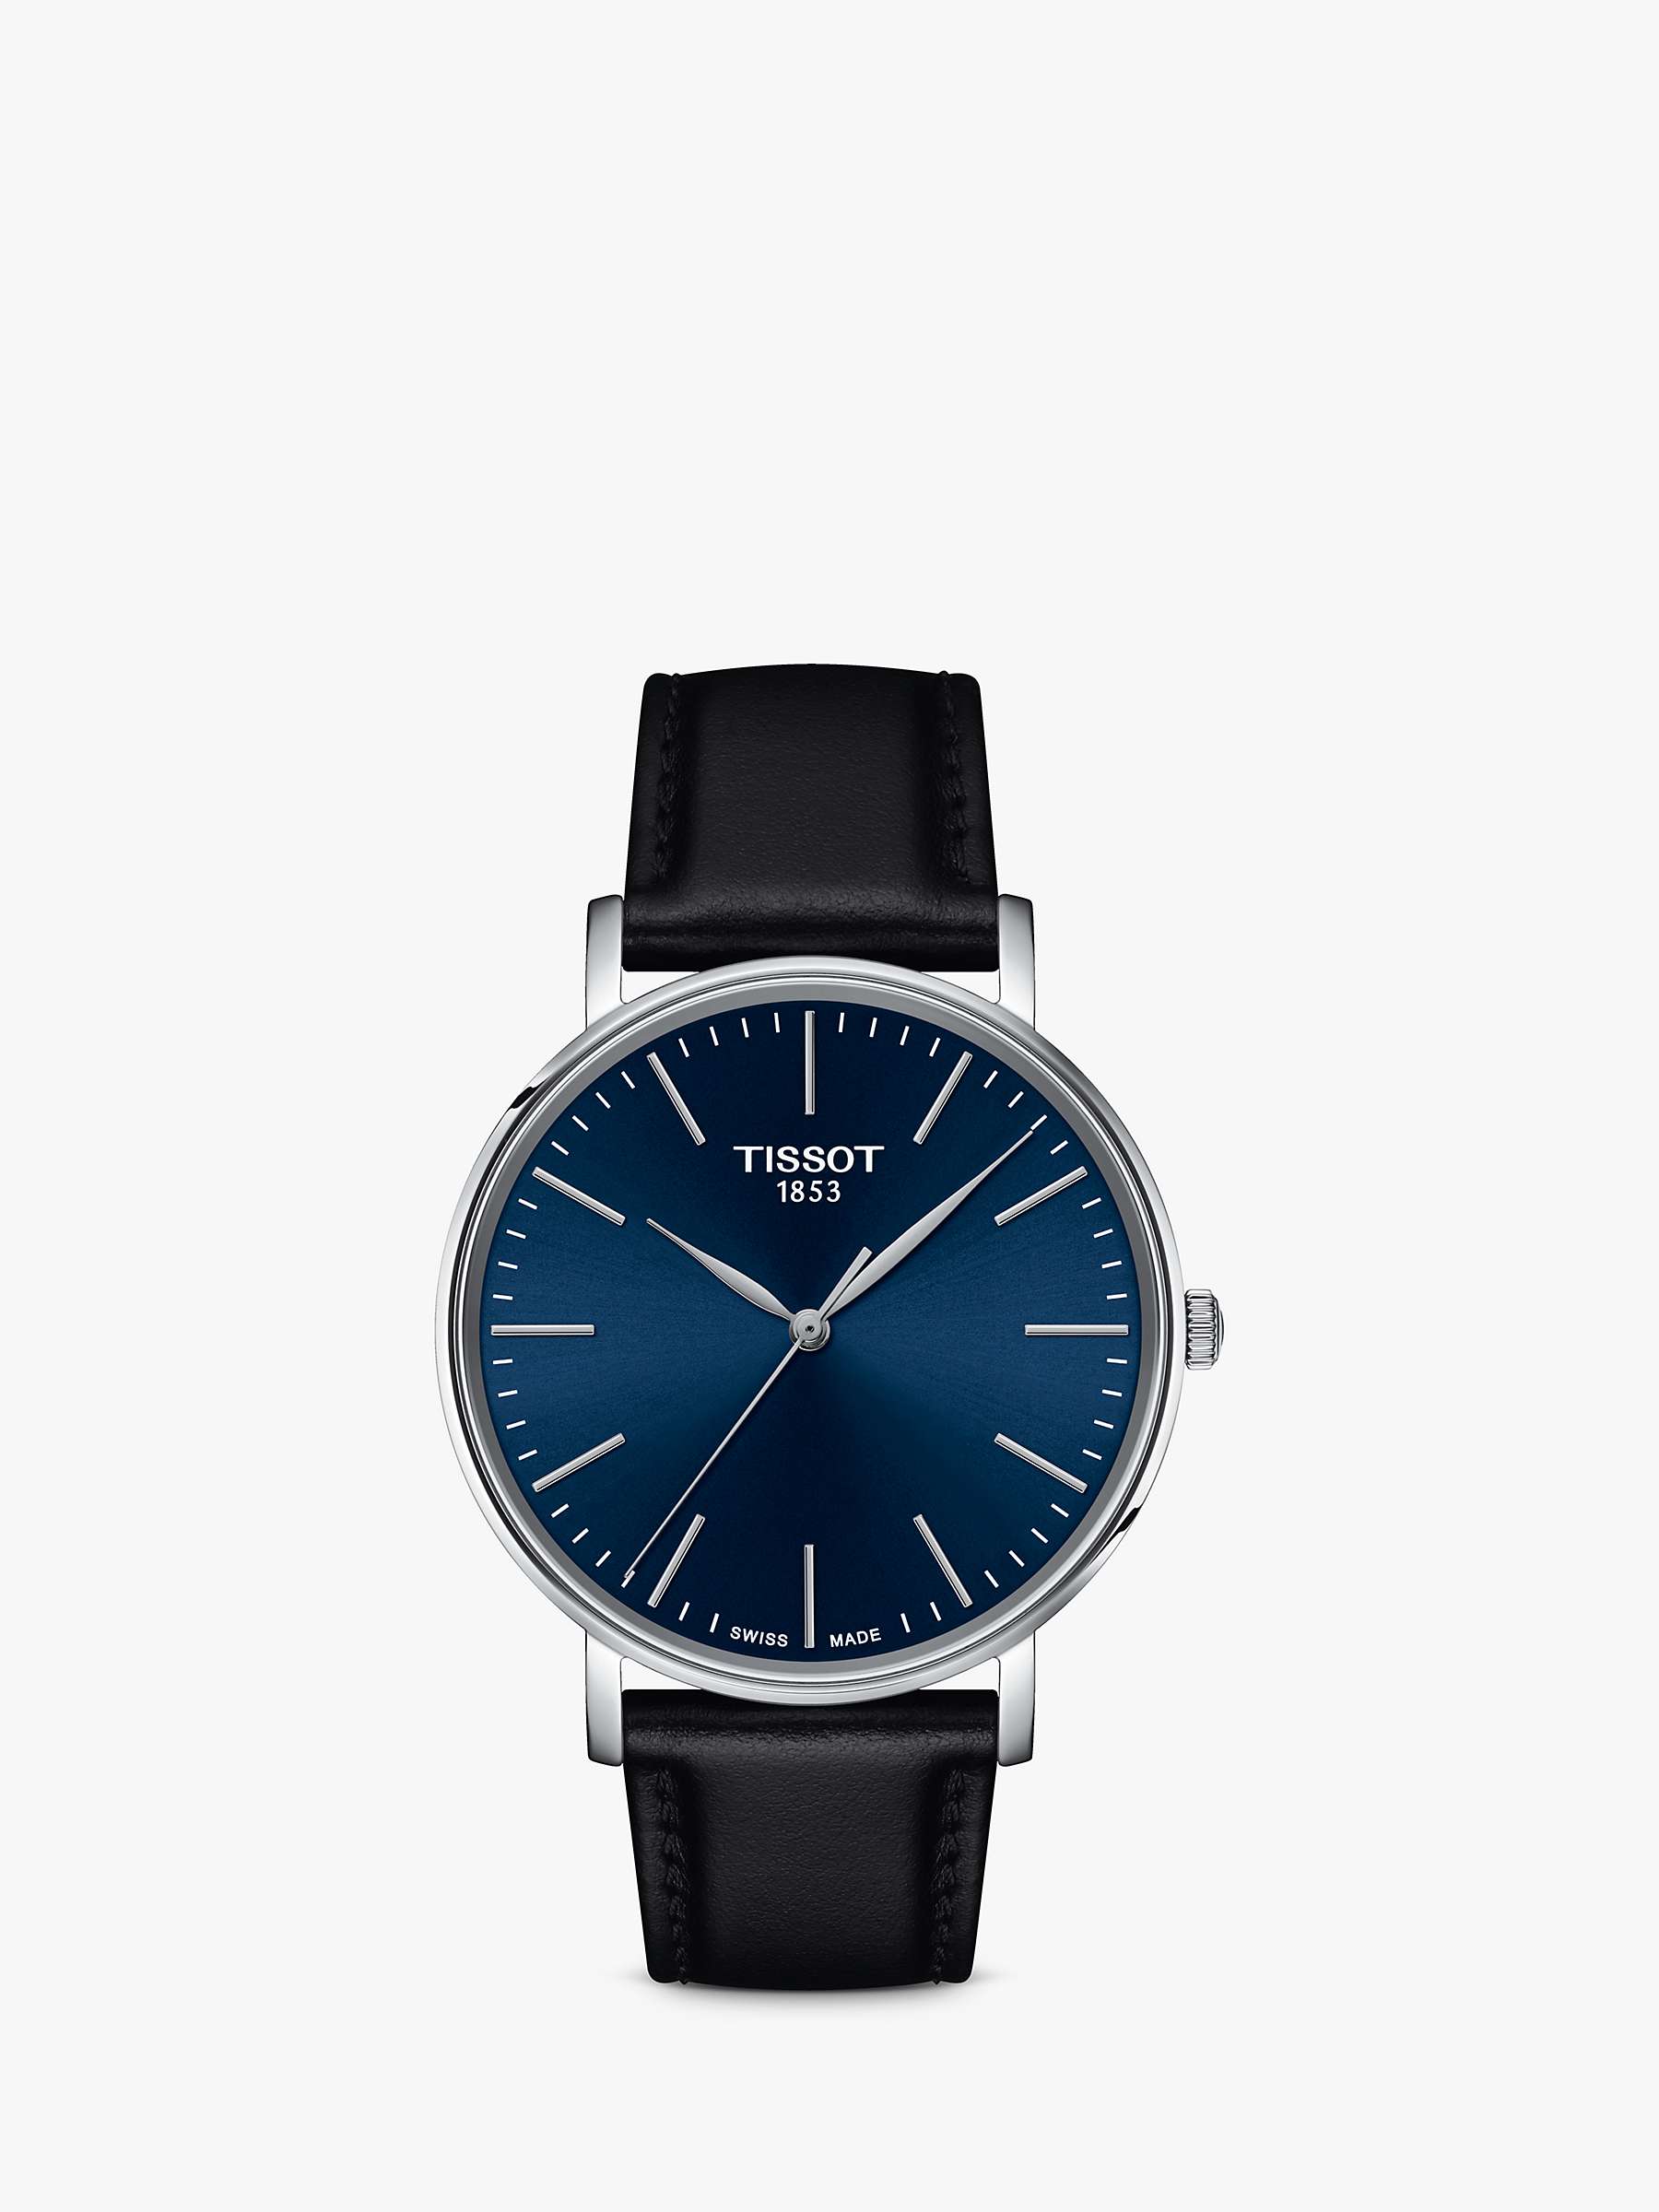 Buy Tissot Men's Everytime Leather Strap Watch Online at johnlewis.com